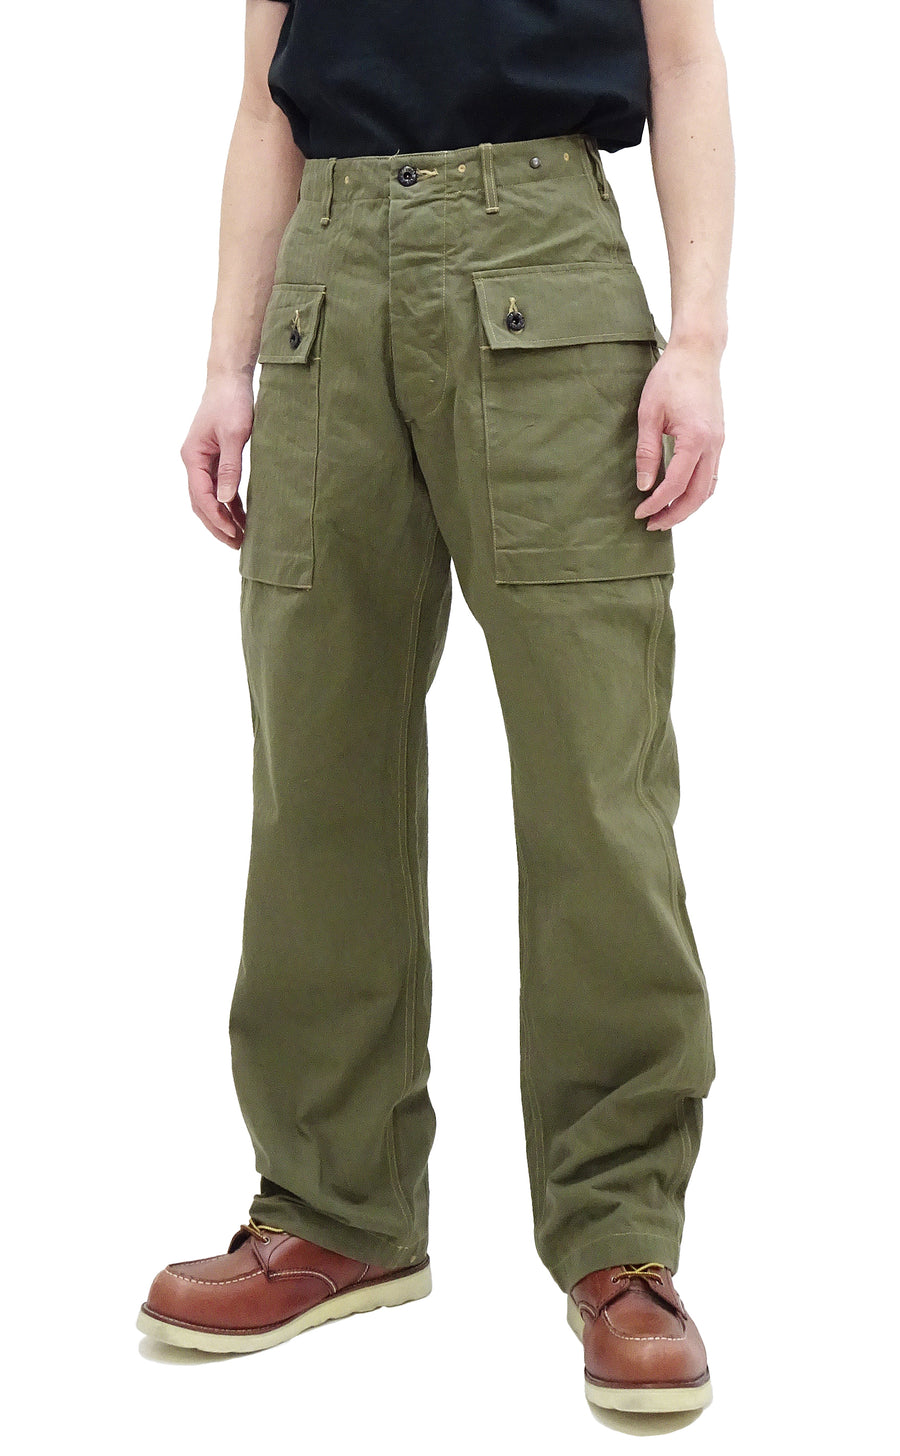 Authorized Pattern Indian Army Combat Uniform Trouser – Olive Planet